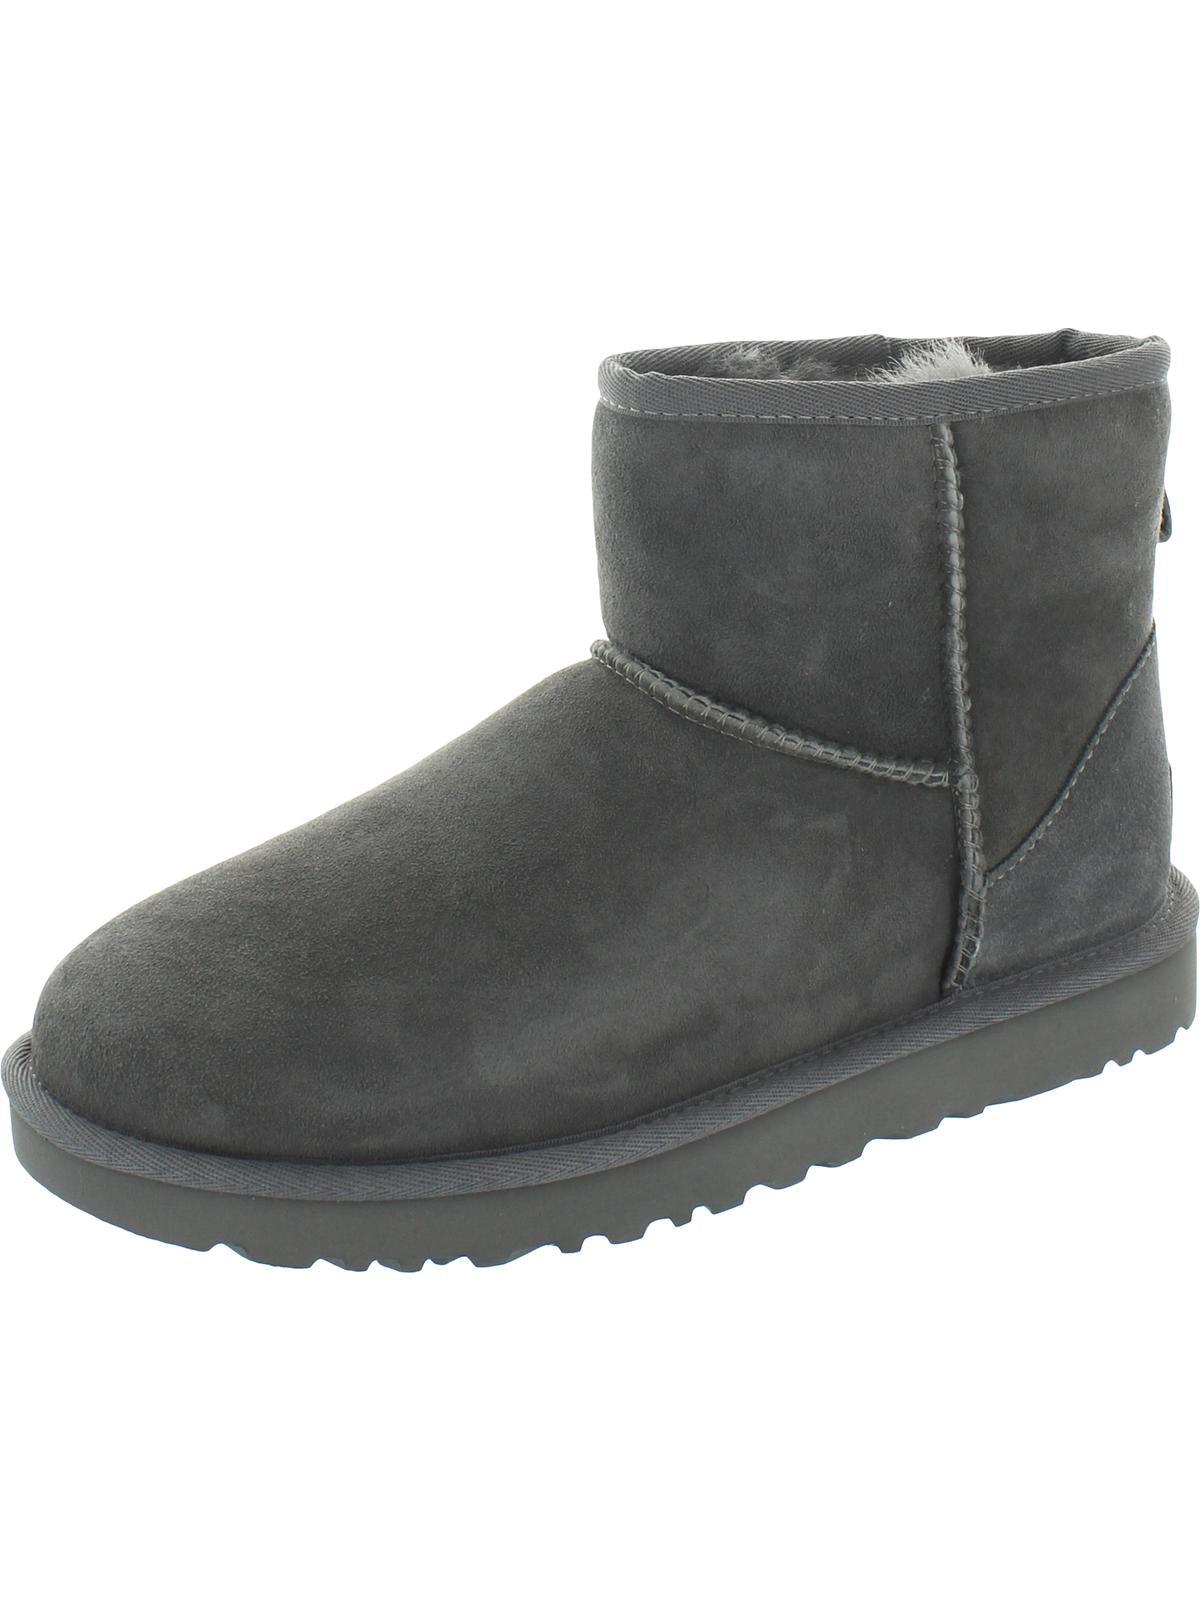 UGG Classic Mini Ii Suede Cold Weather Shearling Boots in Gray | Lyst